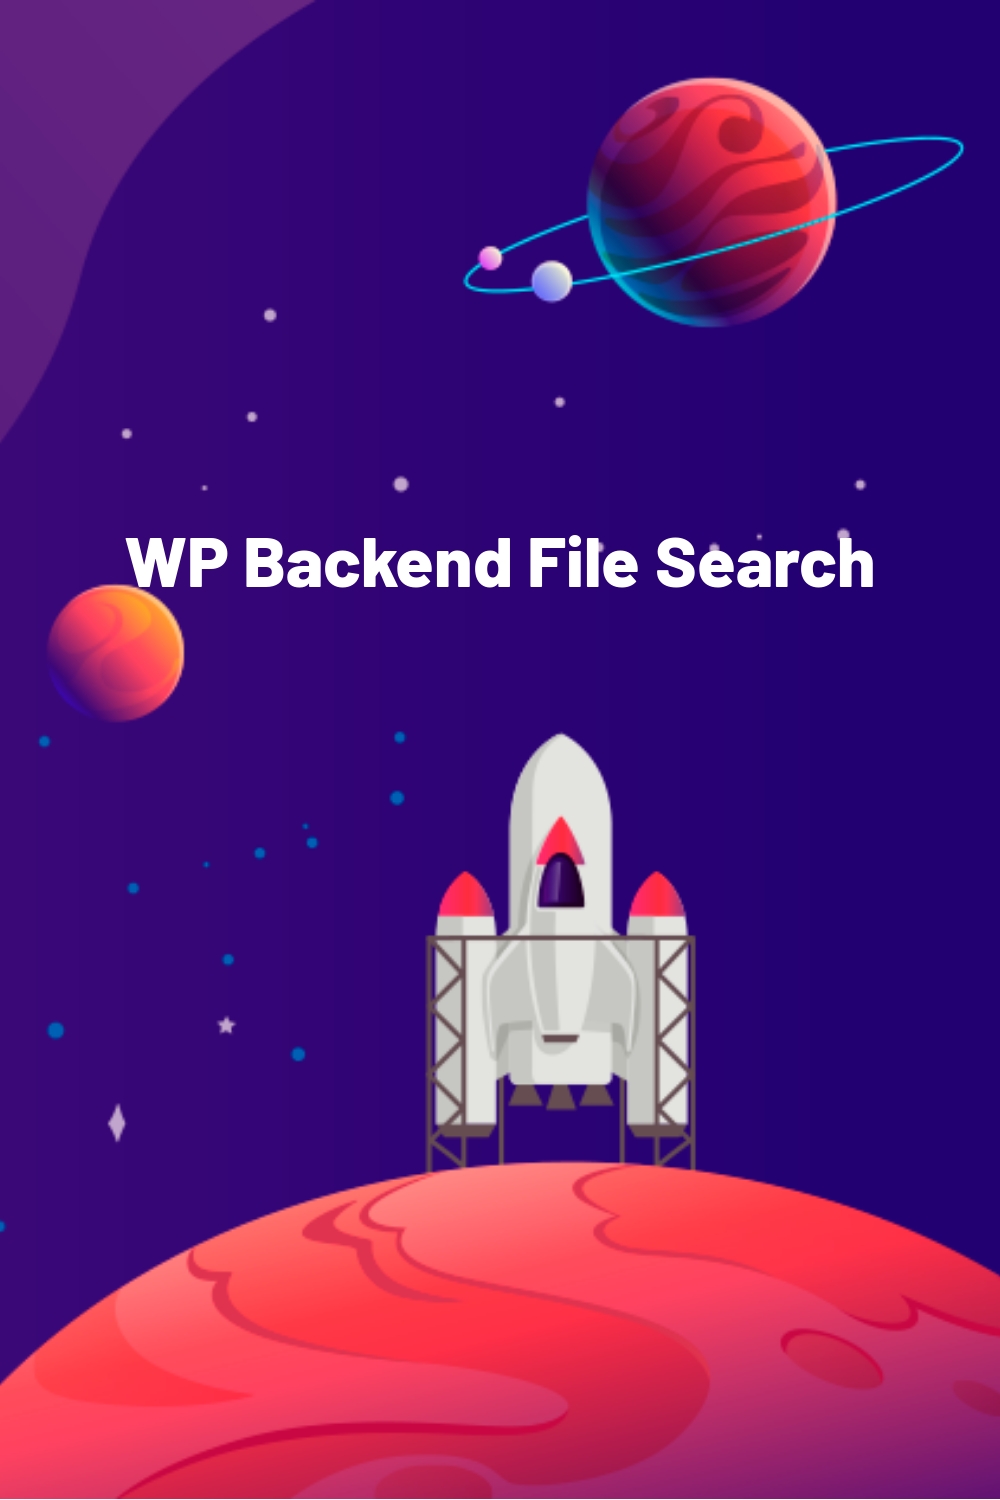 WP Backend File Search